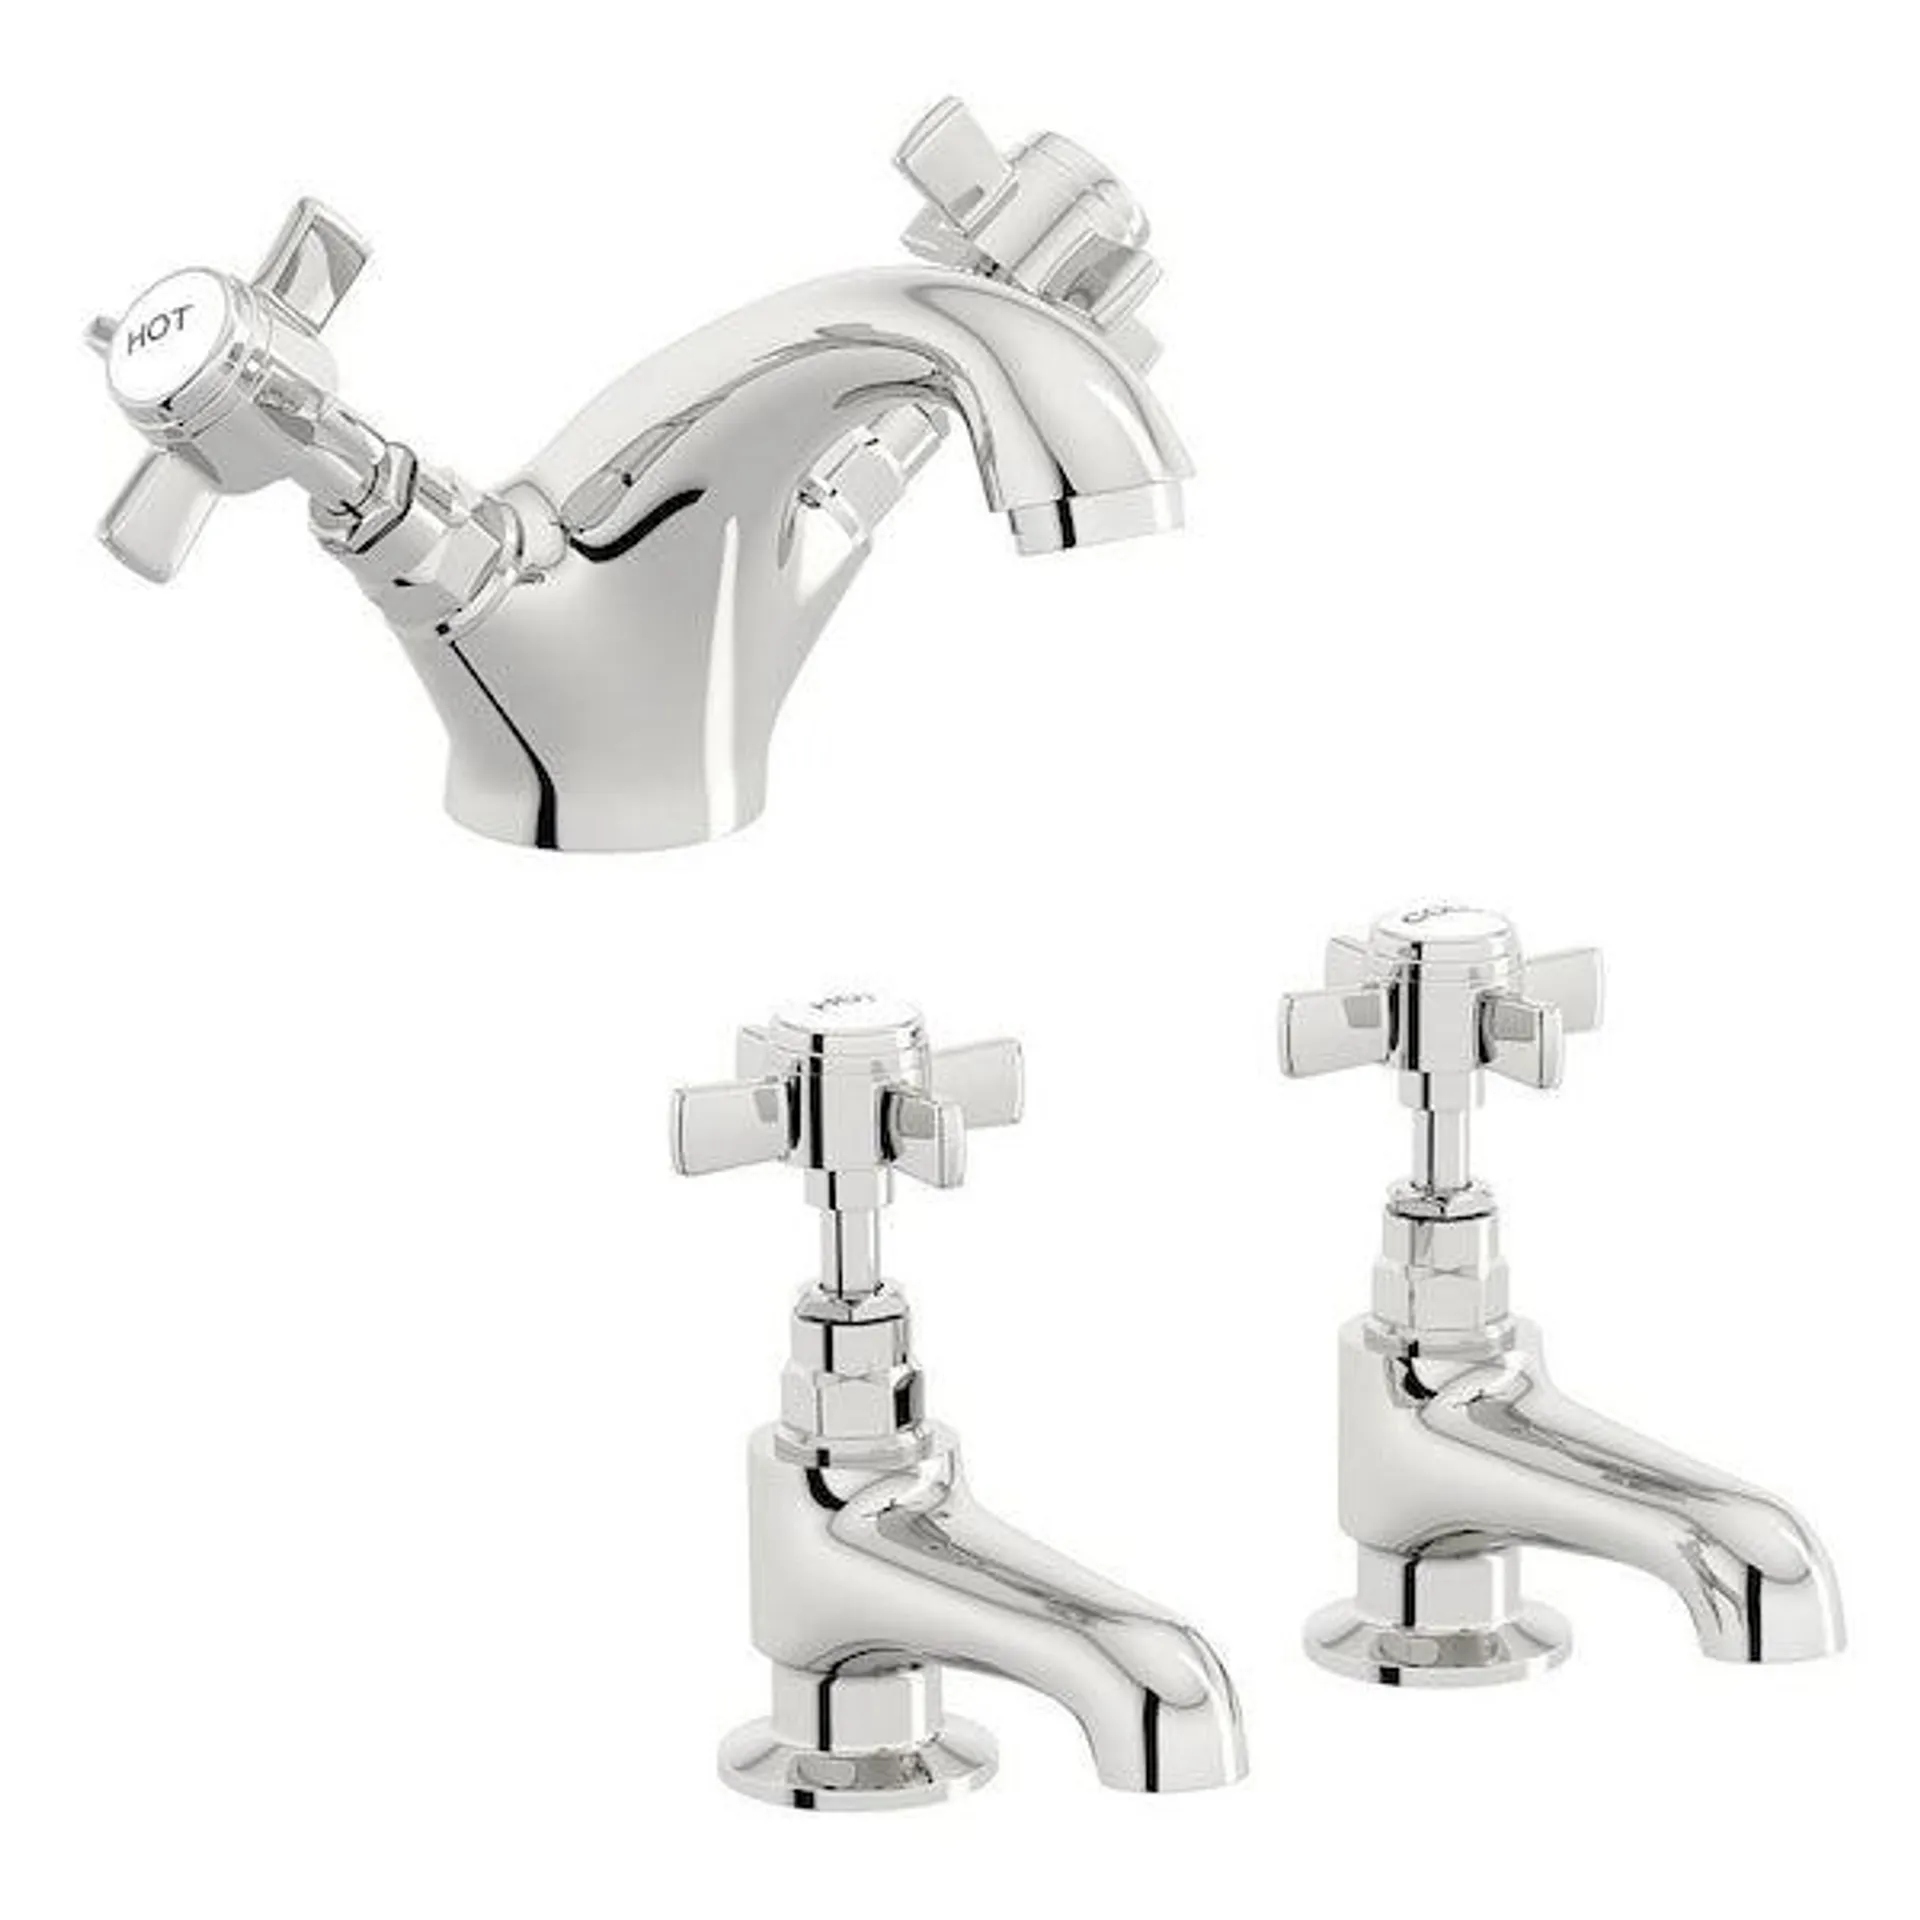 Orchard Dulwich basin mixer and bath tap pack